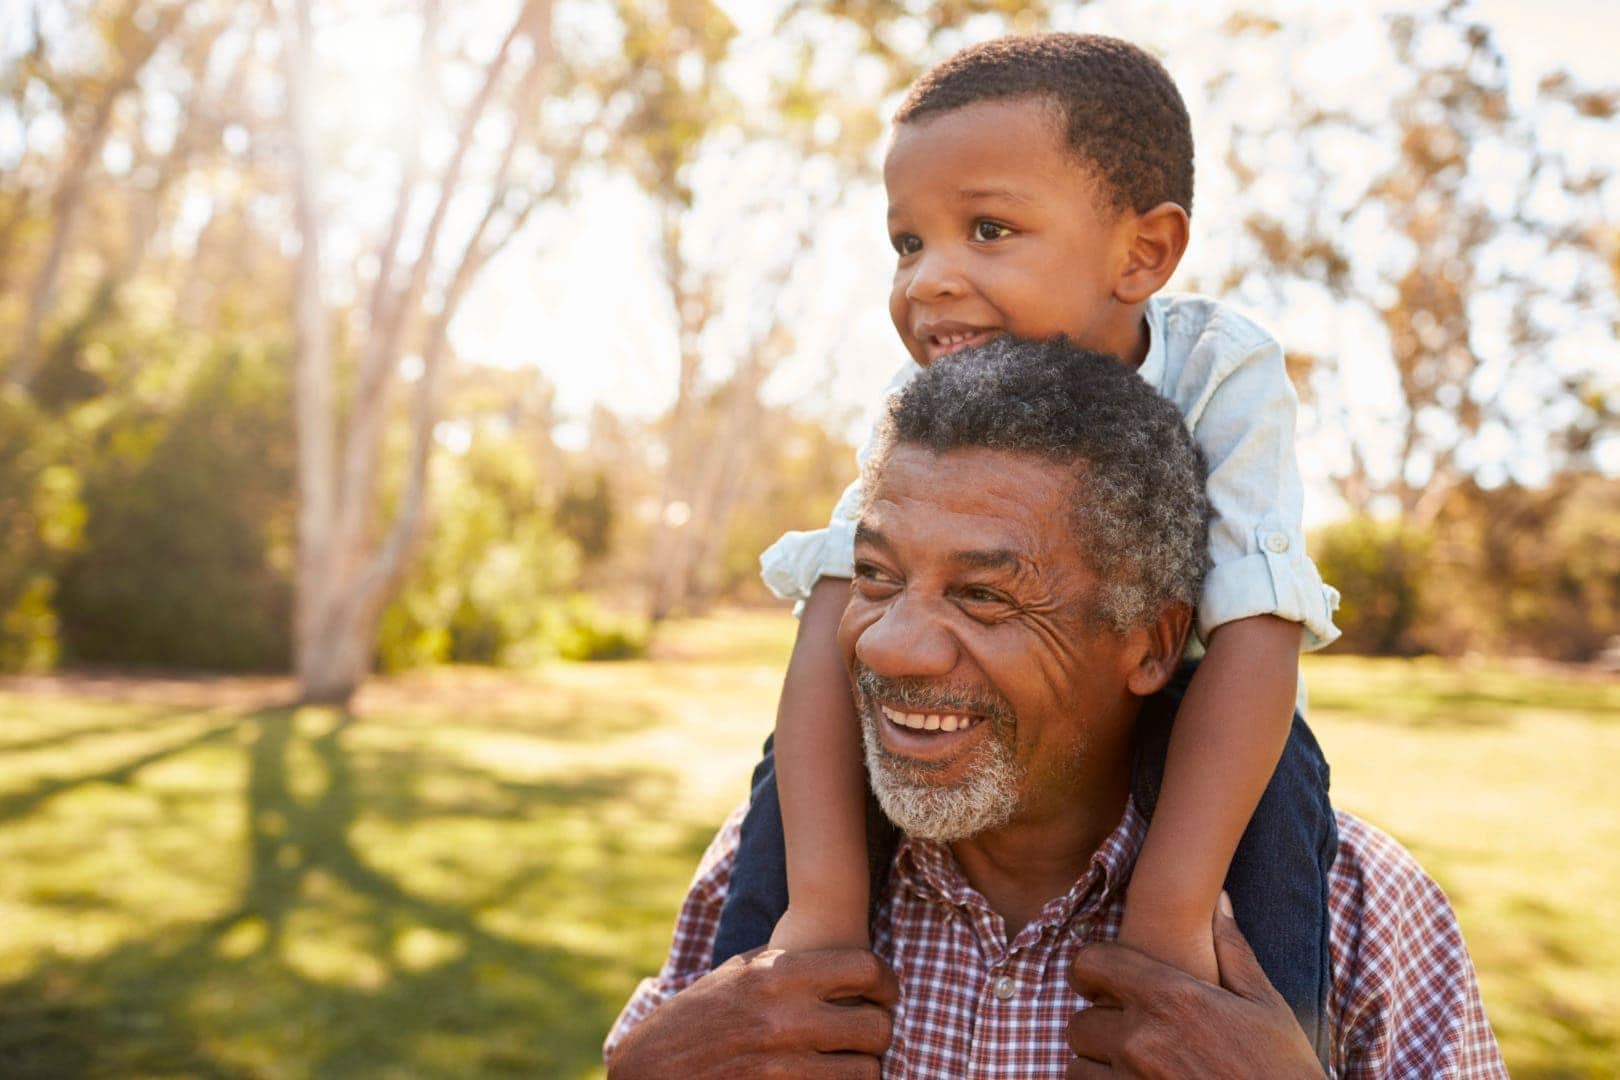 10 things grandchildren can learn from their grandparents